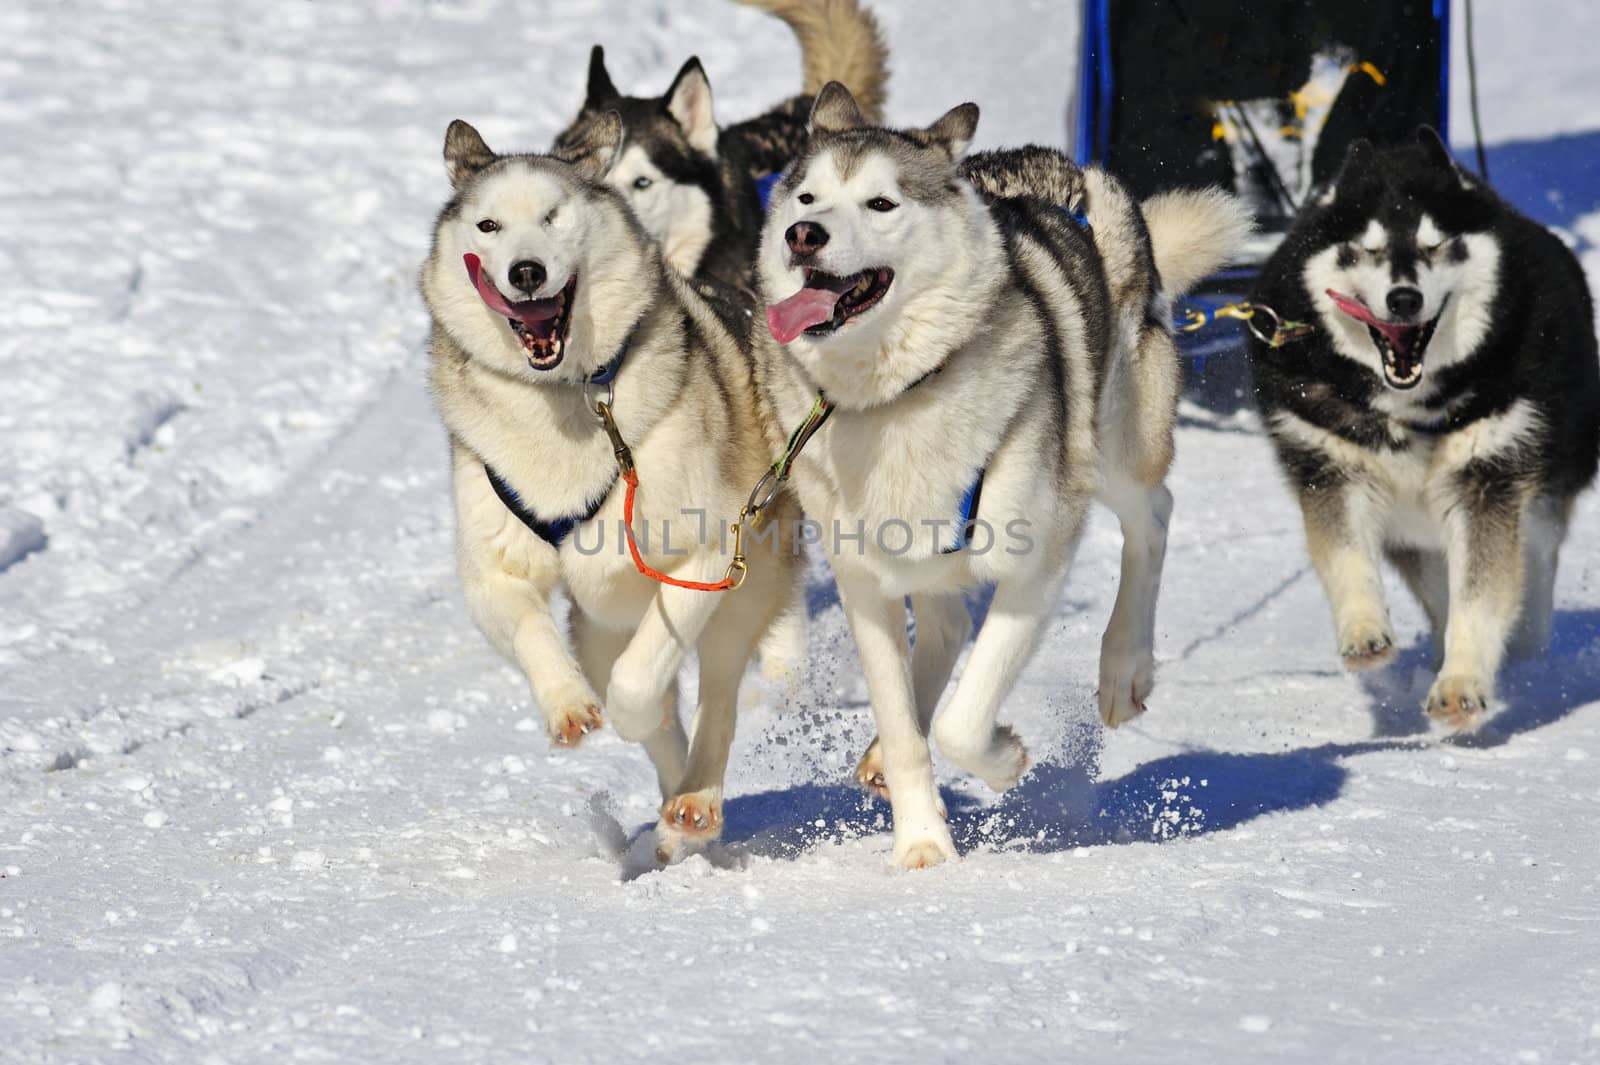 Close up of a sled dog team in full action, heading towards the camera. Space for text in the snow to the bottom left of image.